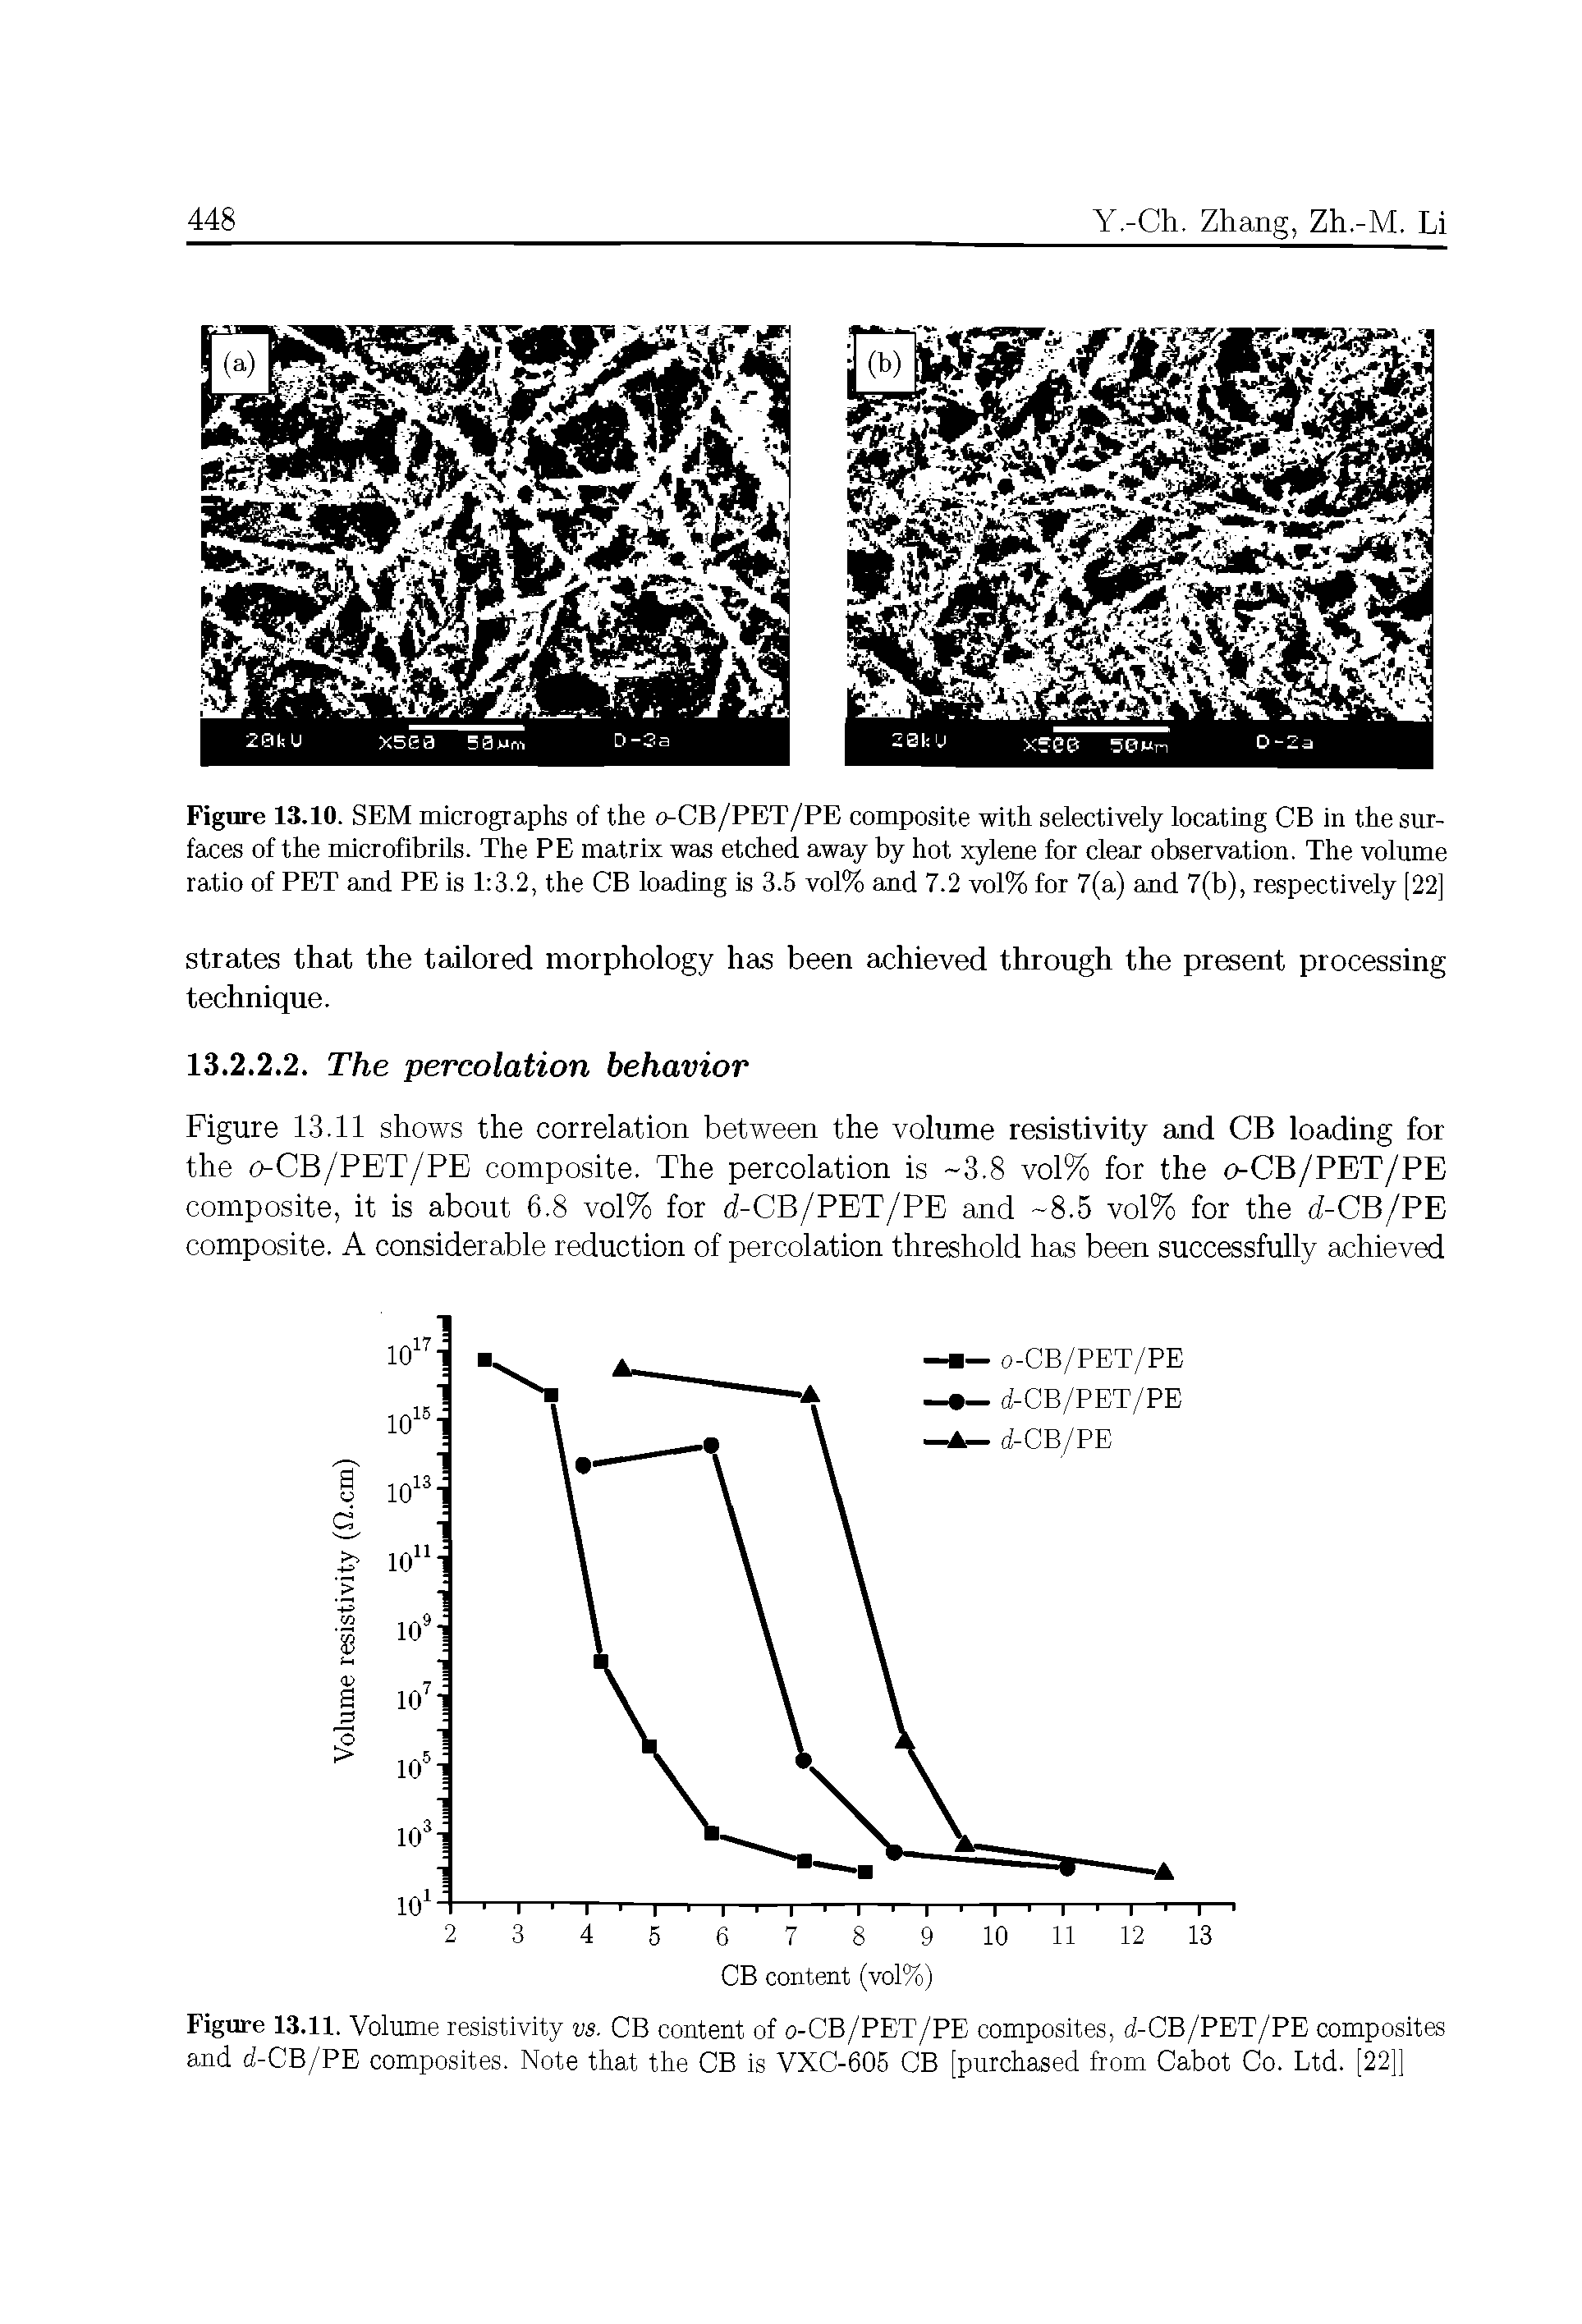 Figure 13.10. SEM micrographs of the o-CB/PET/PE composite with selectively locating CB in the surfaces of the microfibrils. The PE matrix was etched away by hot xylene for clear observation. The volume ratio of PET and PE is 1 3.2, the CB loading is 3.5 vol% and 7.2 vol% for 7(a) and 7(b), respectively [22]...